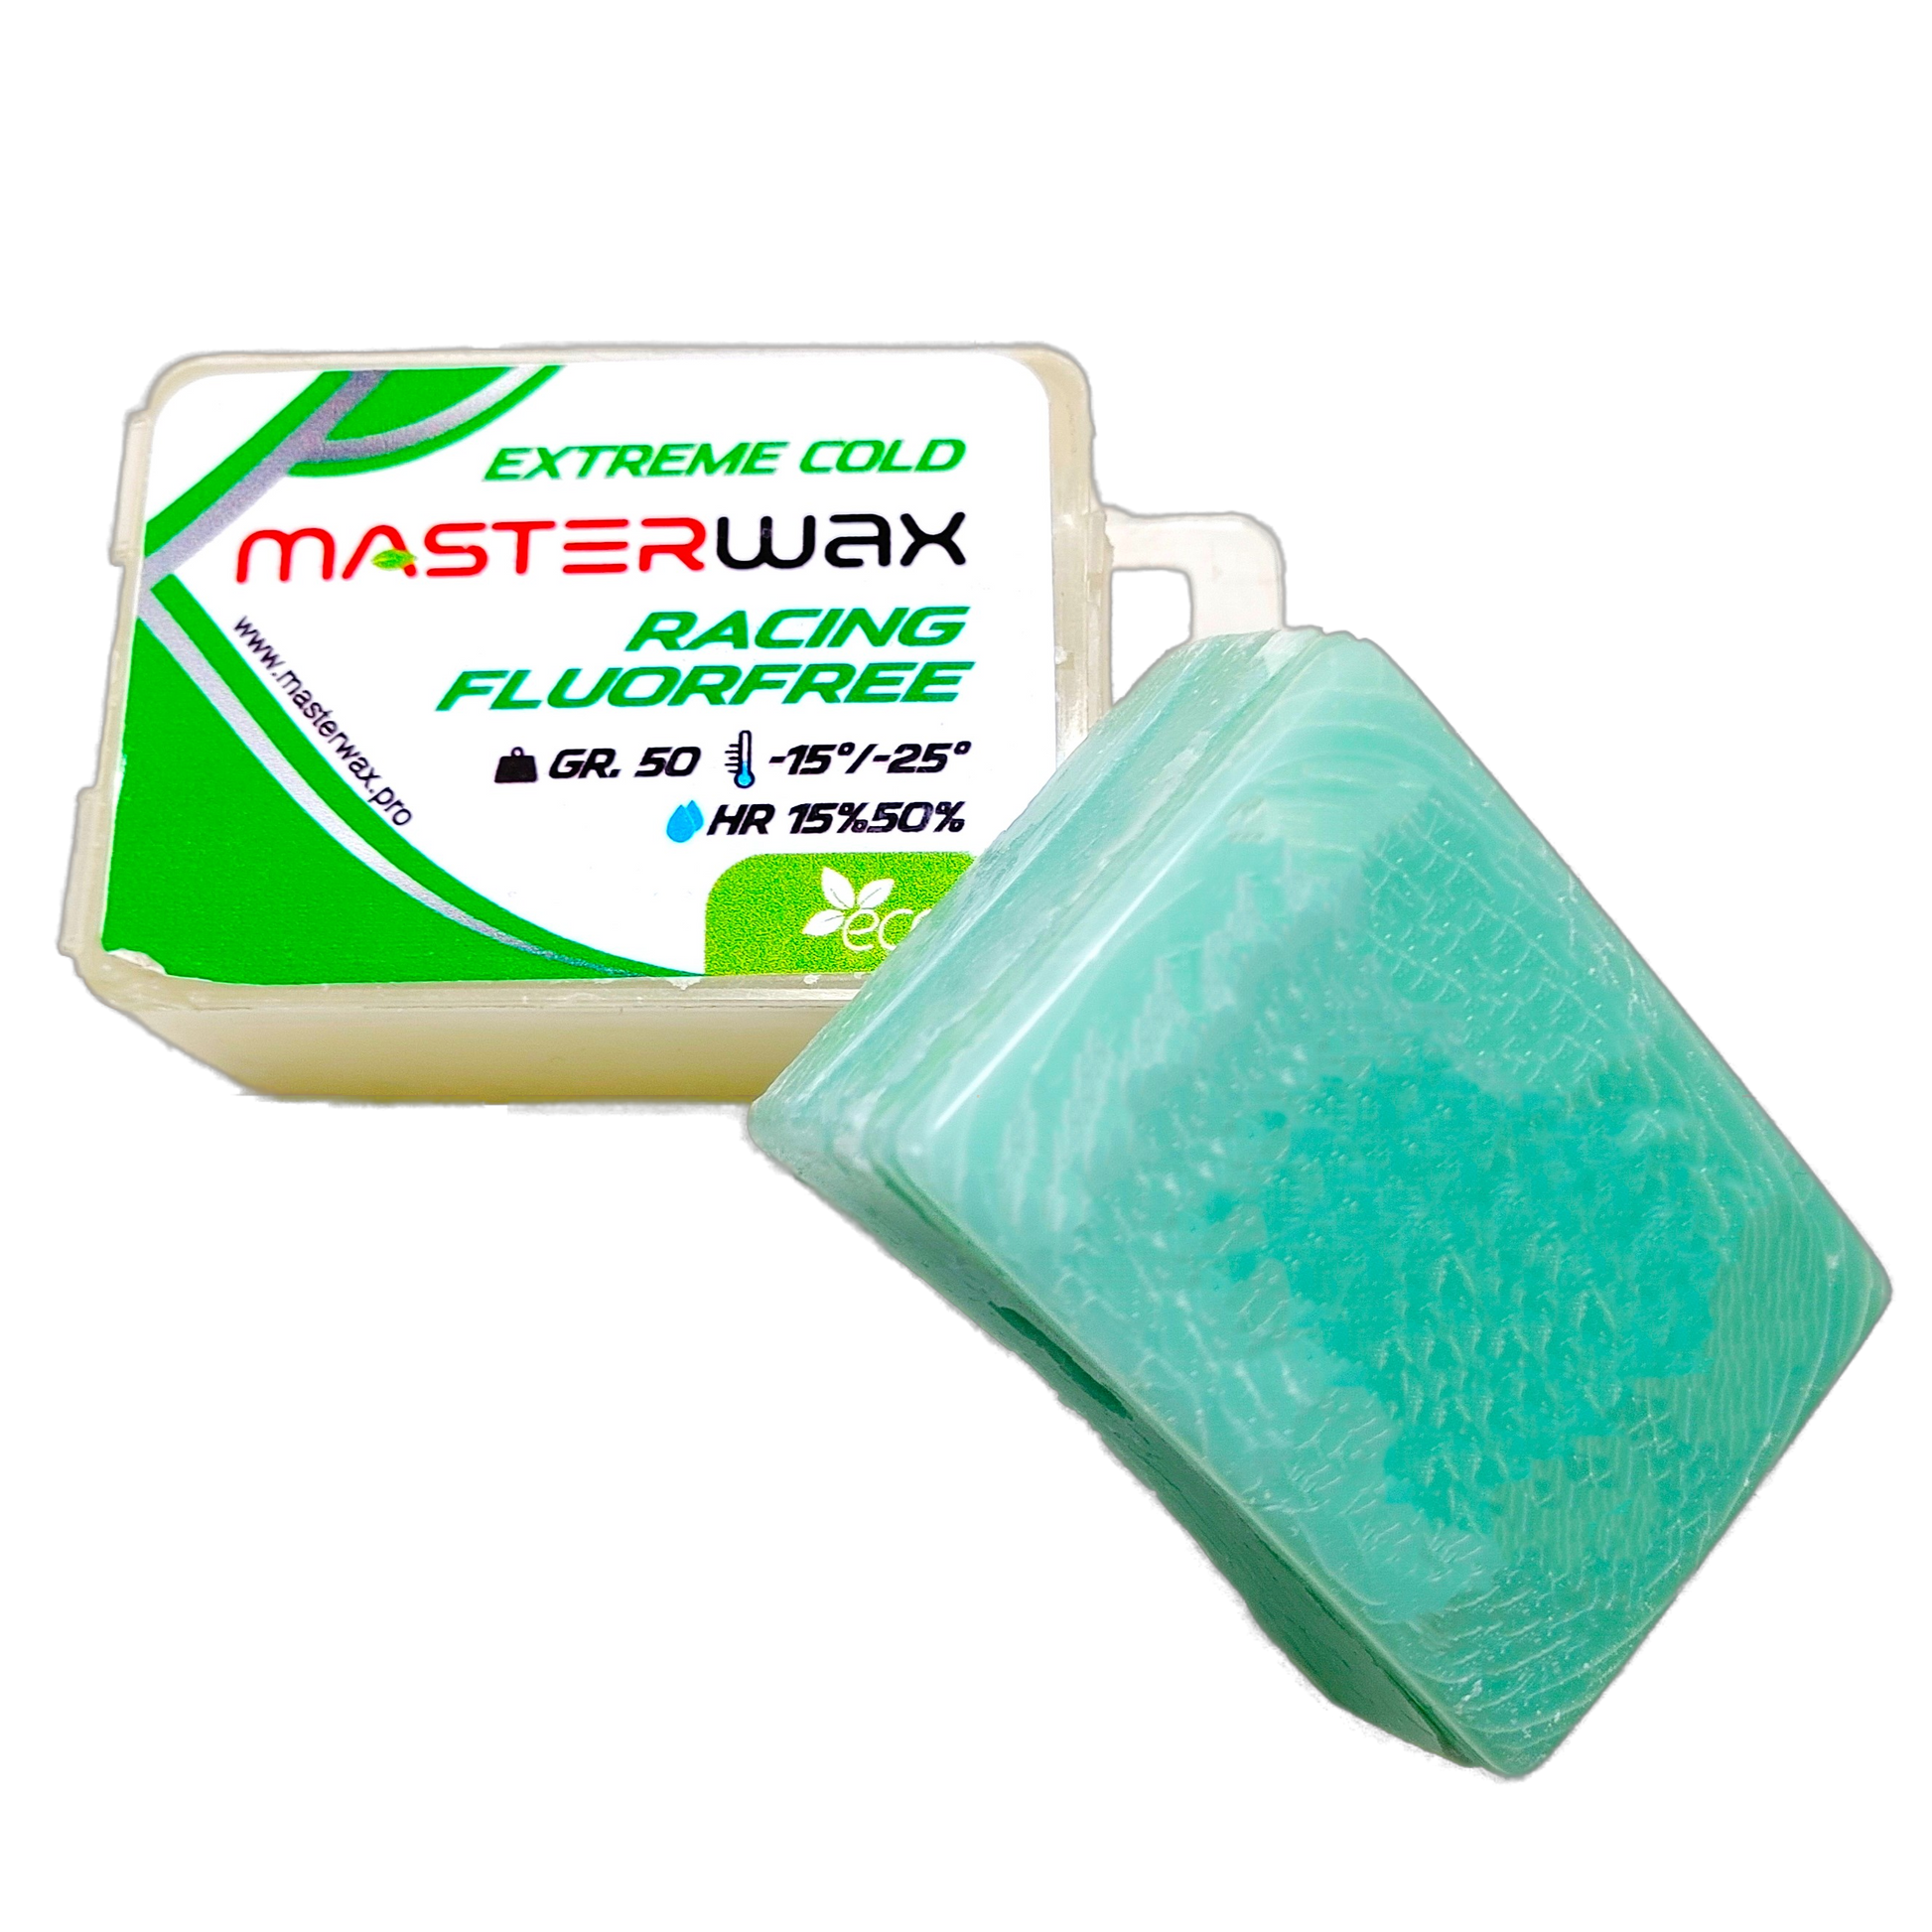 A product picture of the MasterWax RACING FLUORFREE Extreme Cold Melt Wax